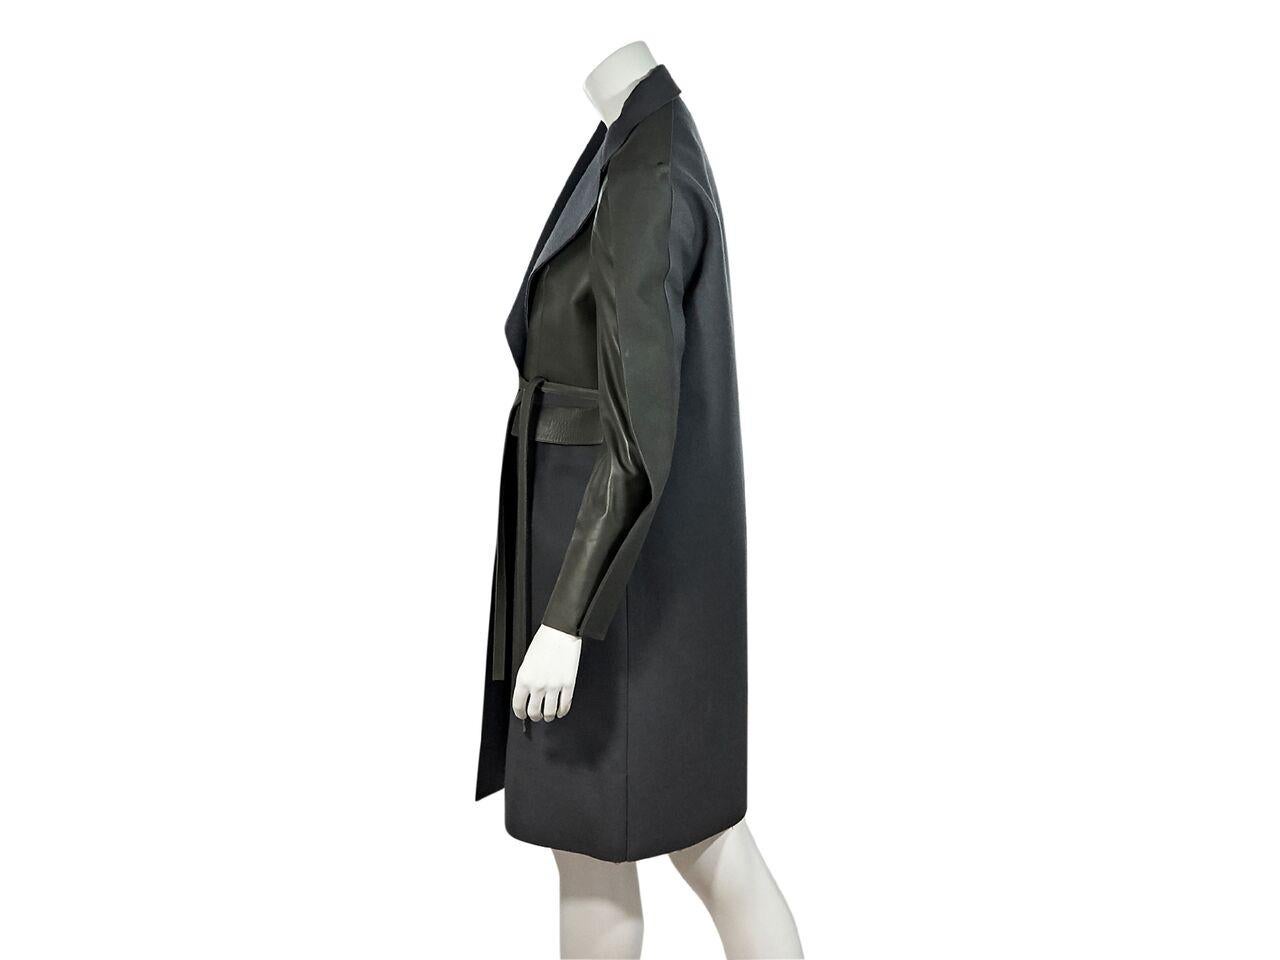 Product details:  Army green leather and grey wool-blend trench coat by Balenciaga.  Notched lapel.  Long sleeves.  Self-tie waist closure. Label size FR36.
Condition: Pre-owned. Very good. 
Est. Retail $ 5,450.00